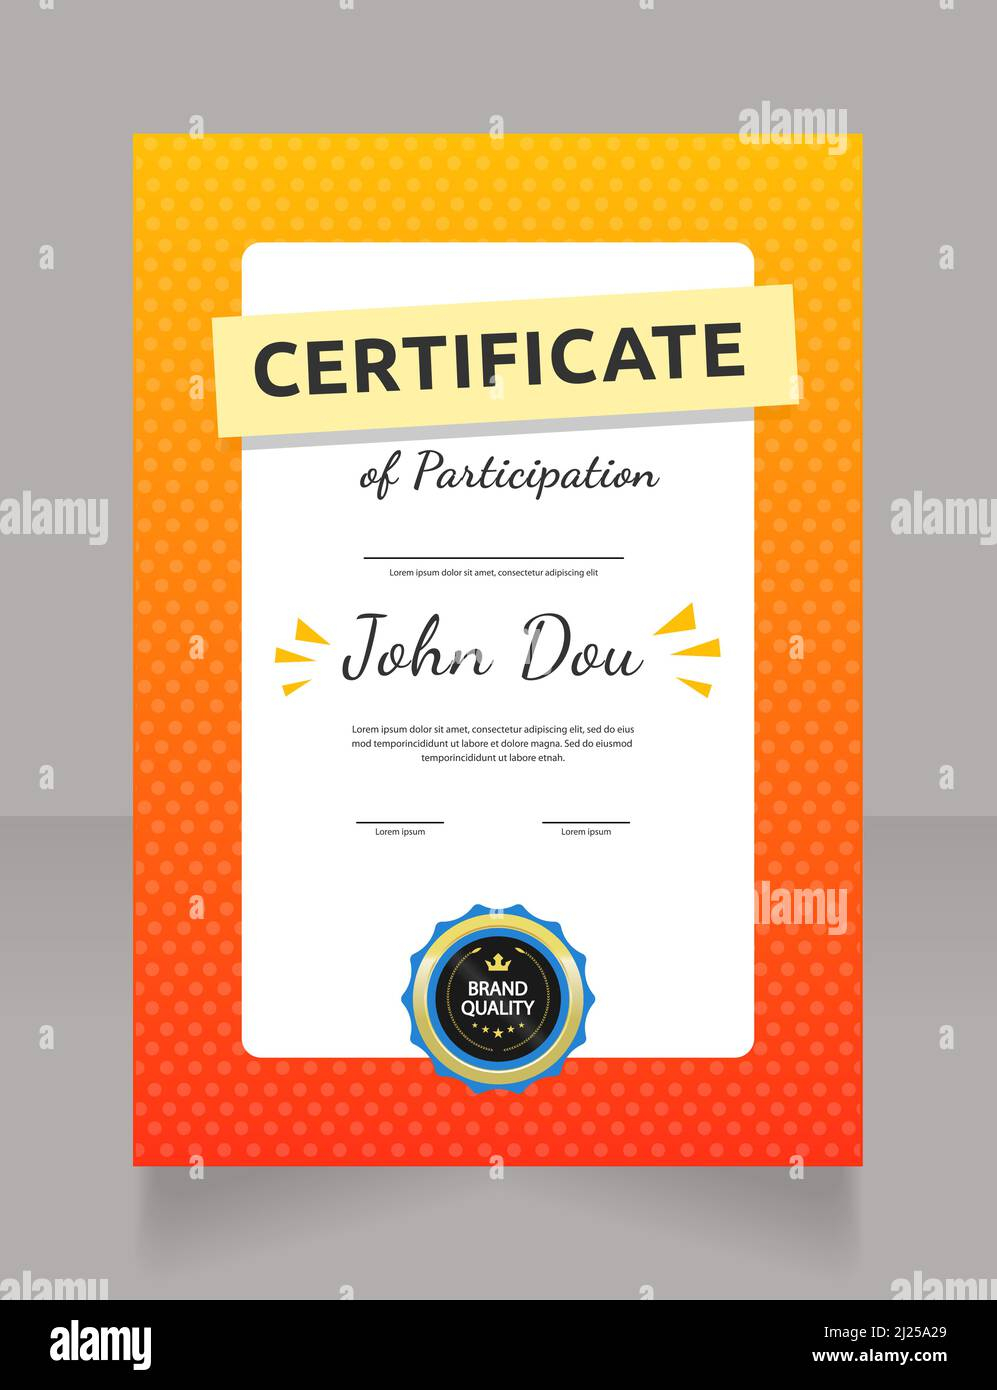 Participation in conference certificate design template